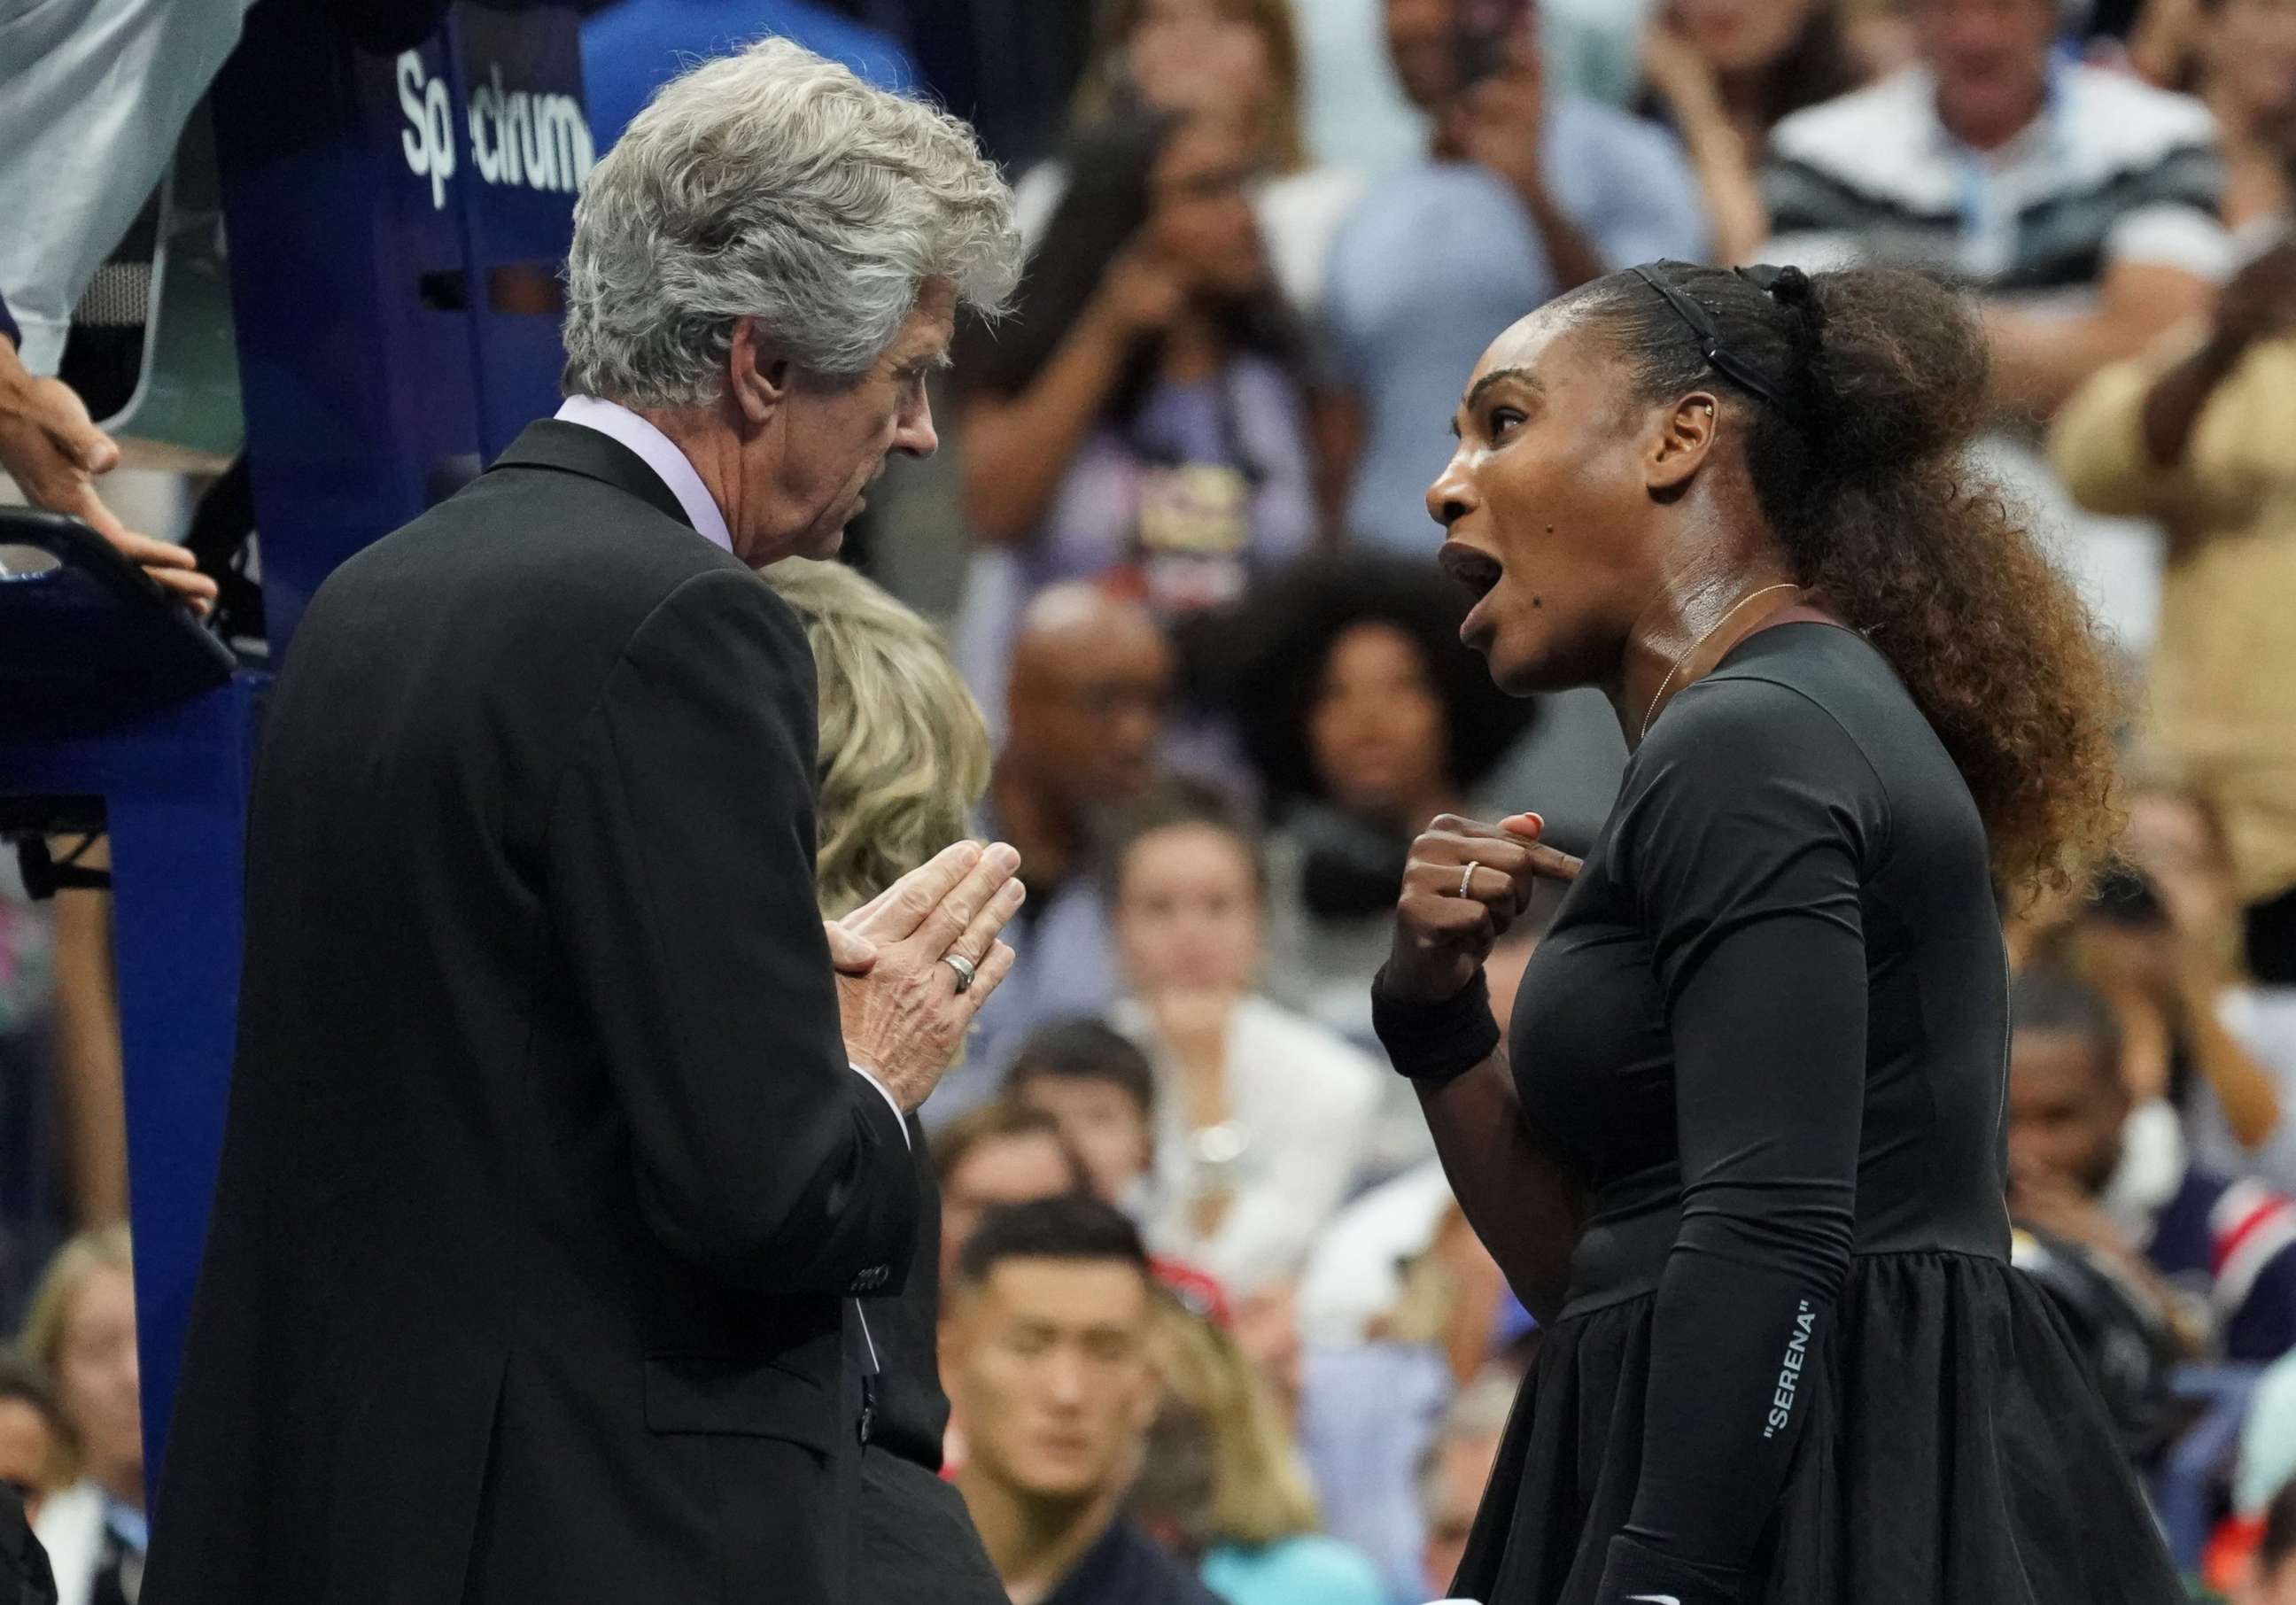 PHOTO: Serena Williams of the United States argues with referee Brian Earley during her Women's Singles finals match against Naomi Osaka of Japan at the 2018 US Open in New York, Sept. 8, 2018.